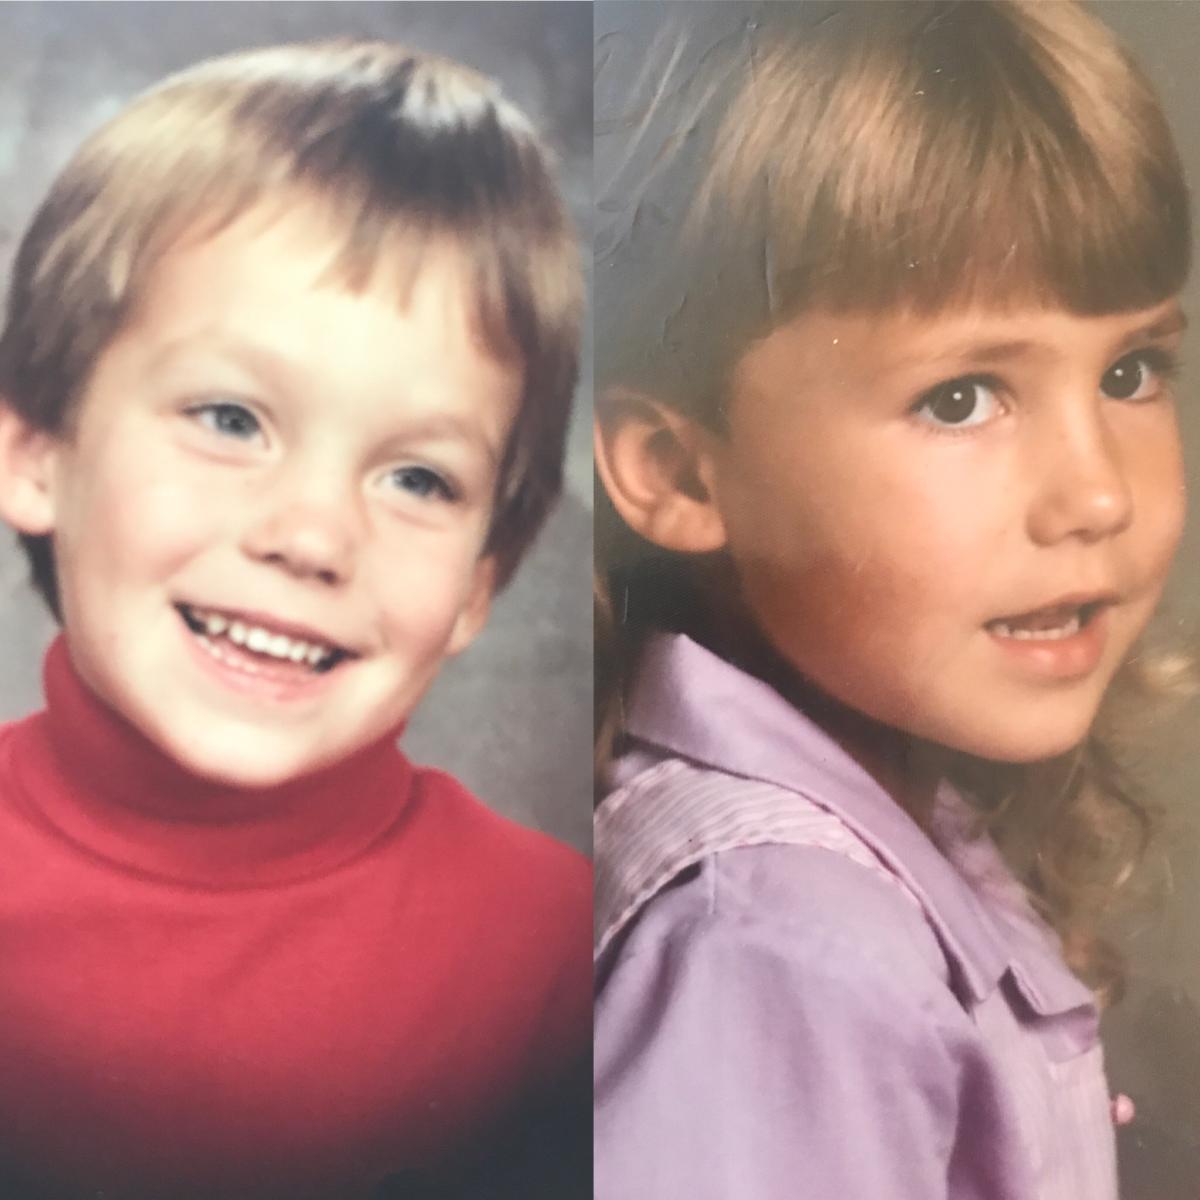 Broc and me at age 4. Who will he look like?!?